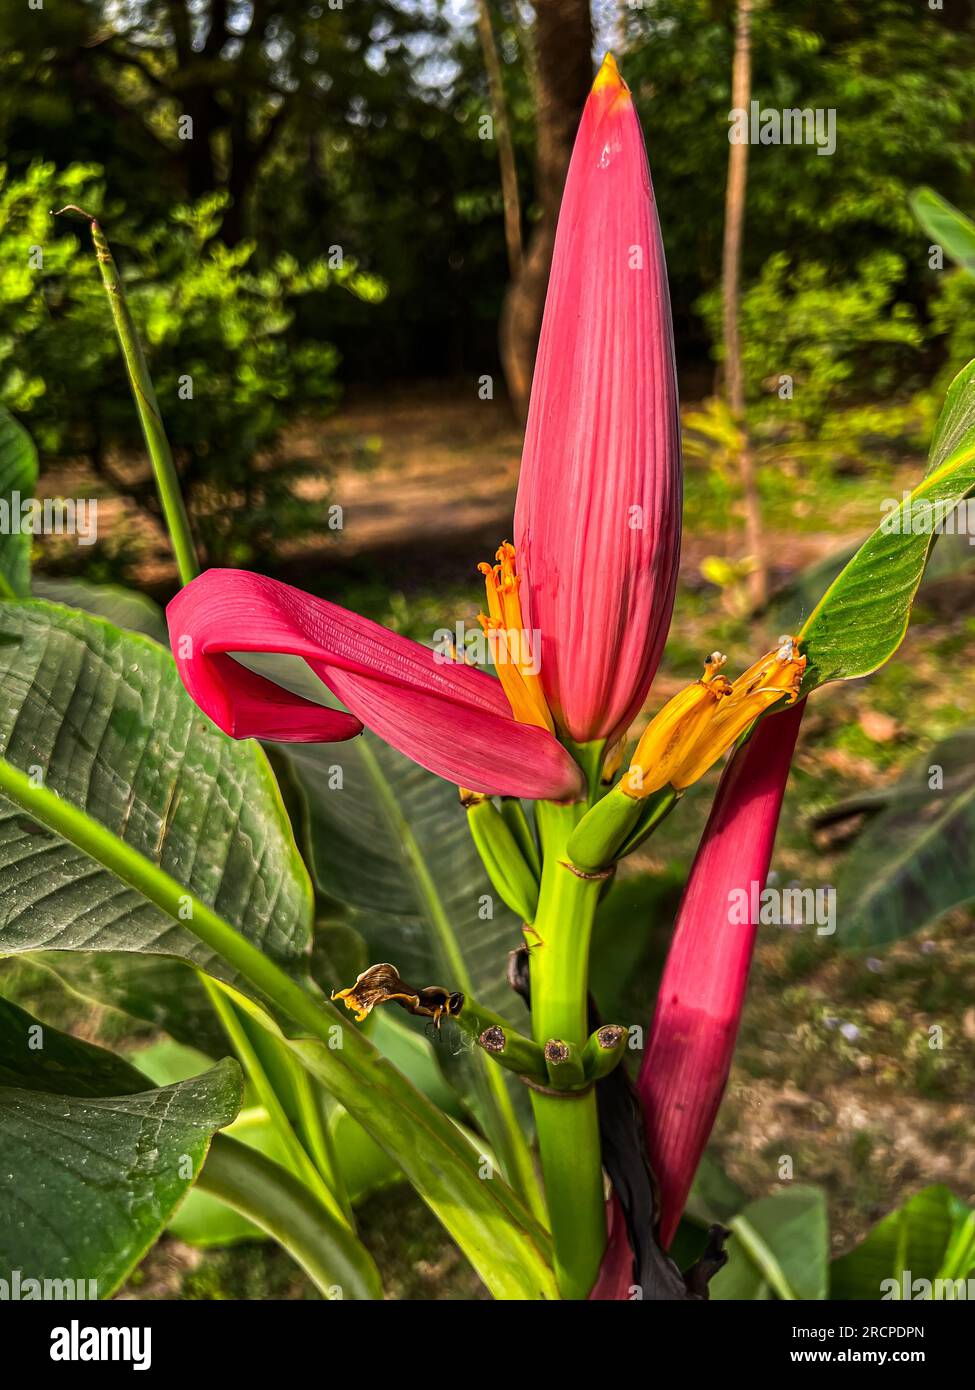 A Musa ornata tree blooming in garden Stock Photo